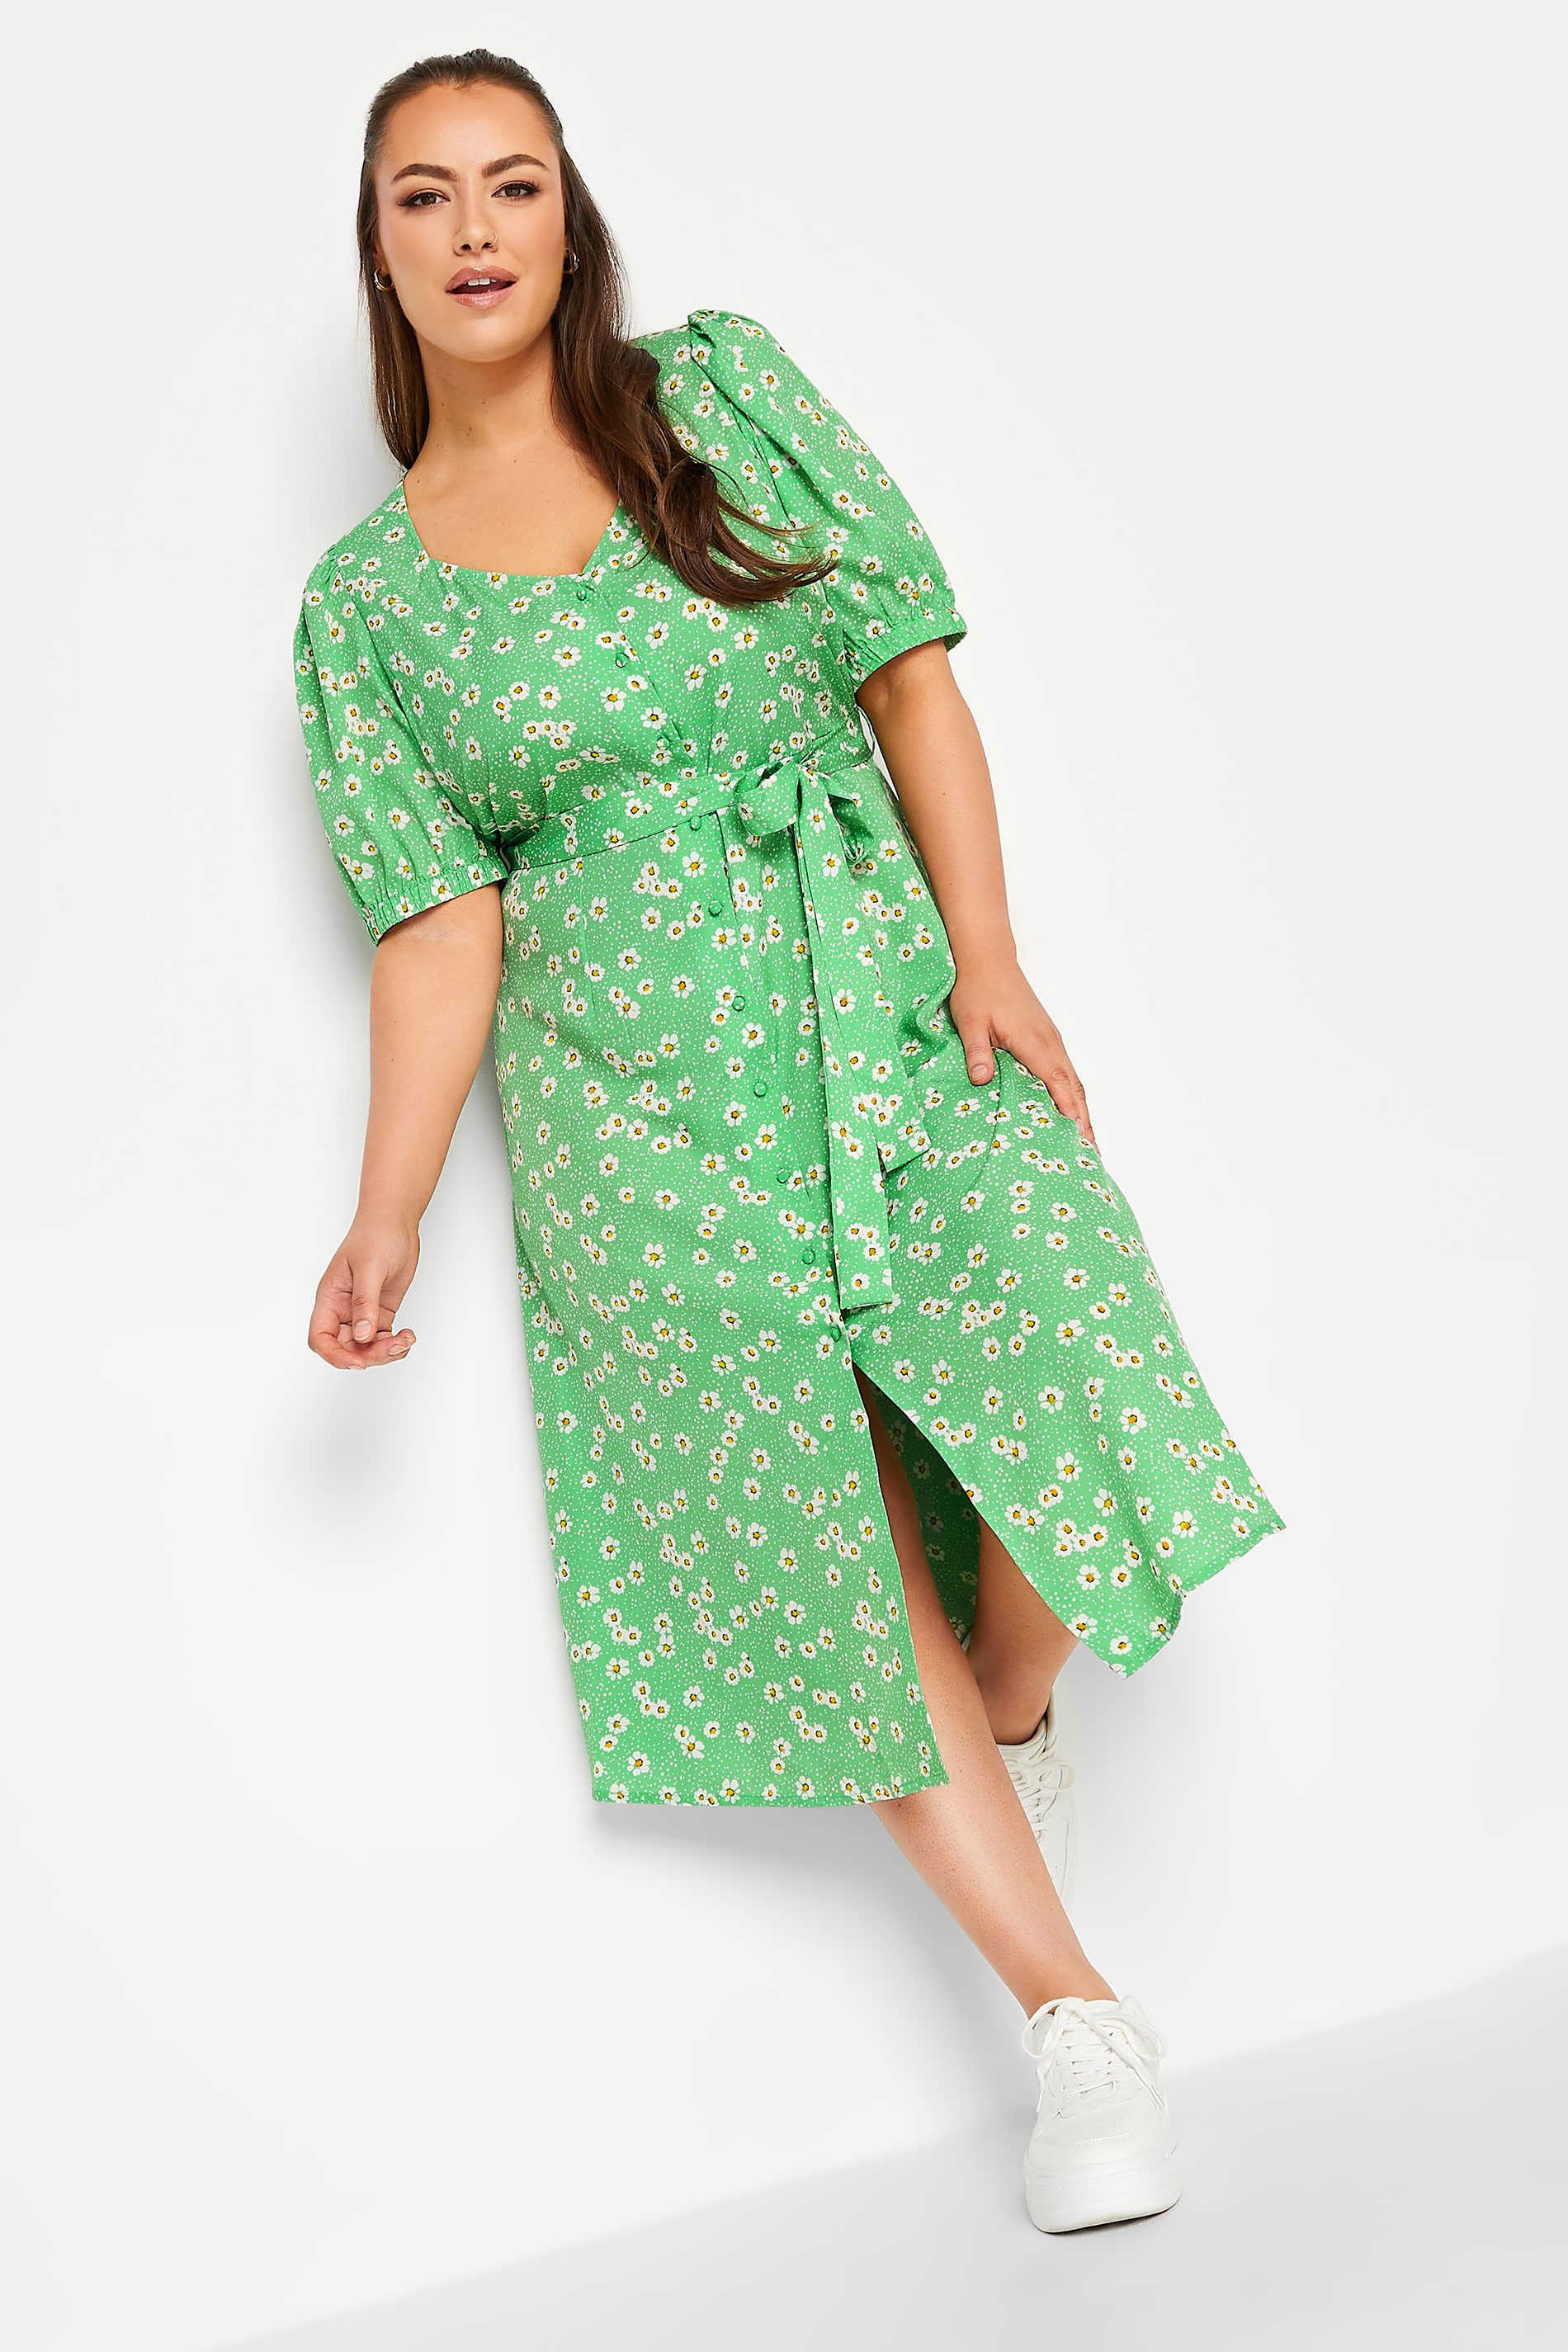 LIMITED COLLECTION Curve Green Sweetheart Neckline Floral Print Tea Dress | Yours Clothing 2